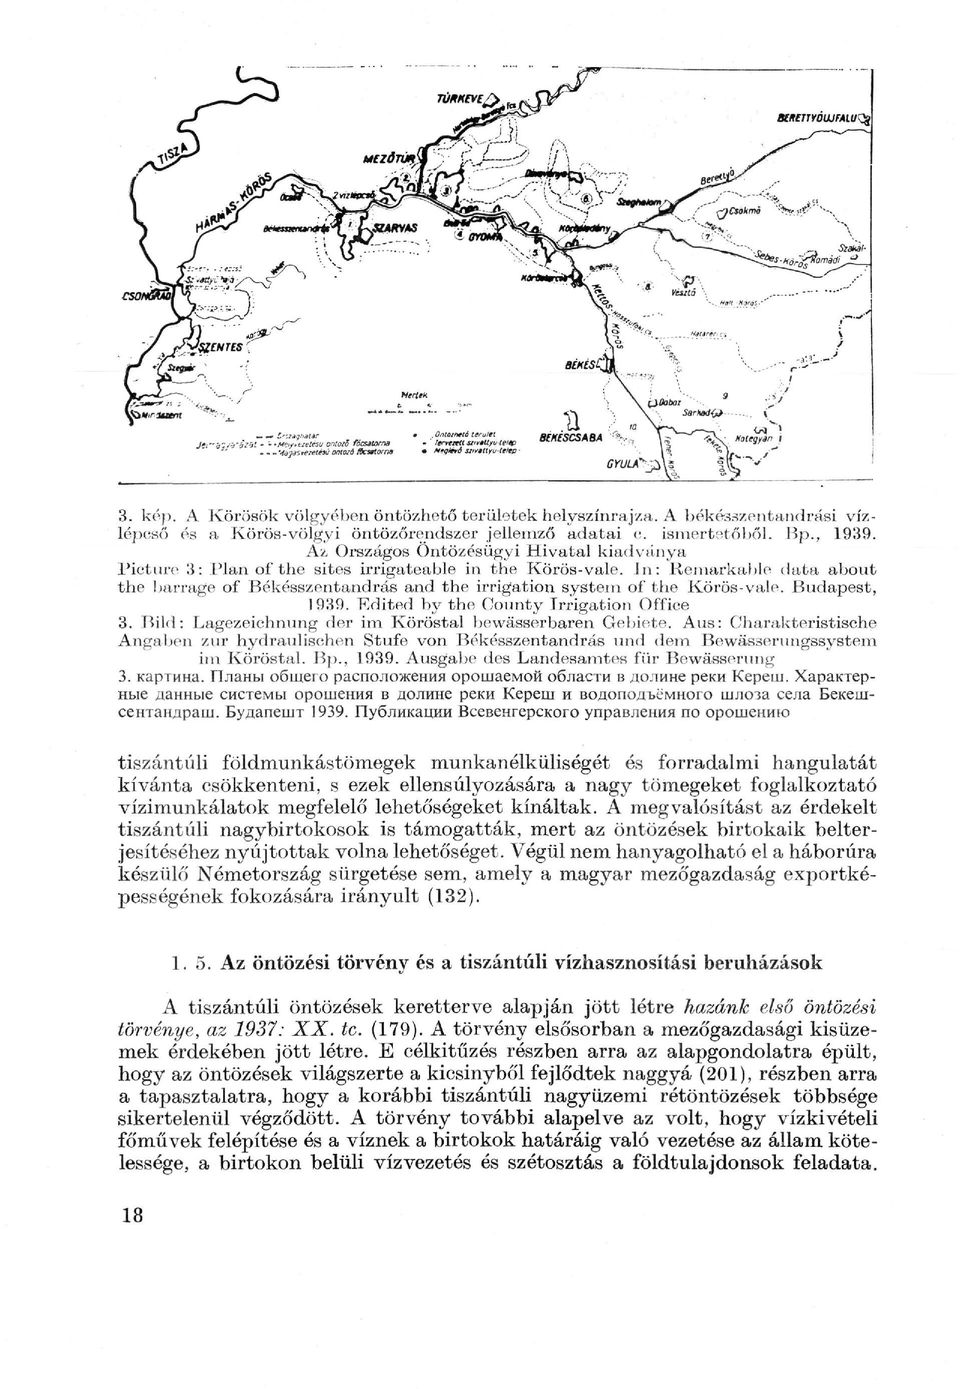 In: Remarkable data about the barrage of Békésszentandrás and the irrigation system of the Körös-vale. Budapest, 1939. Edited by the County Irrigation Office 3.